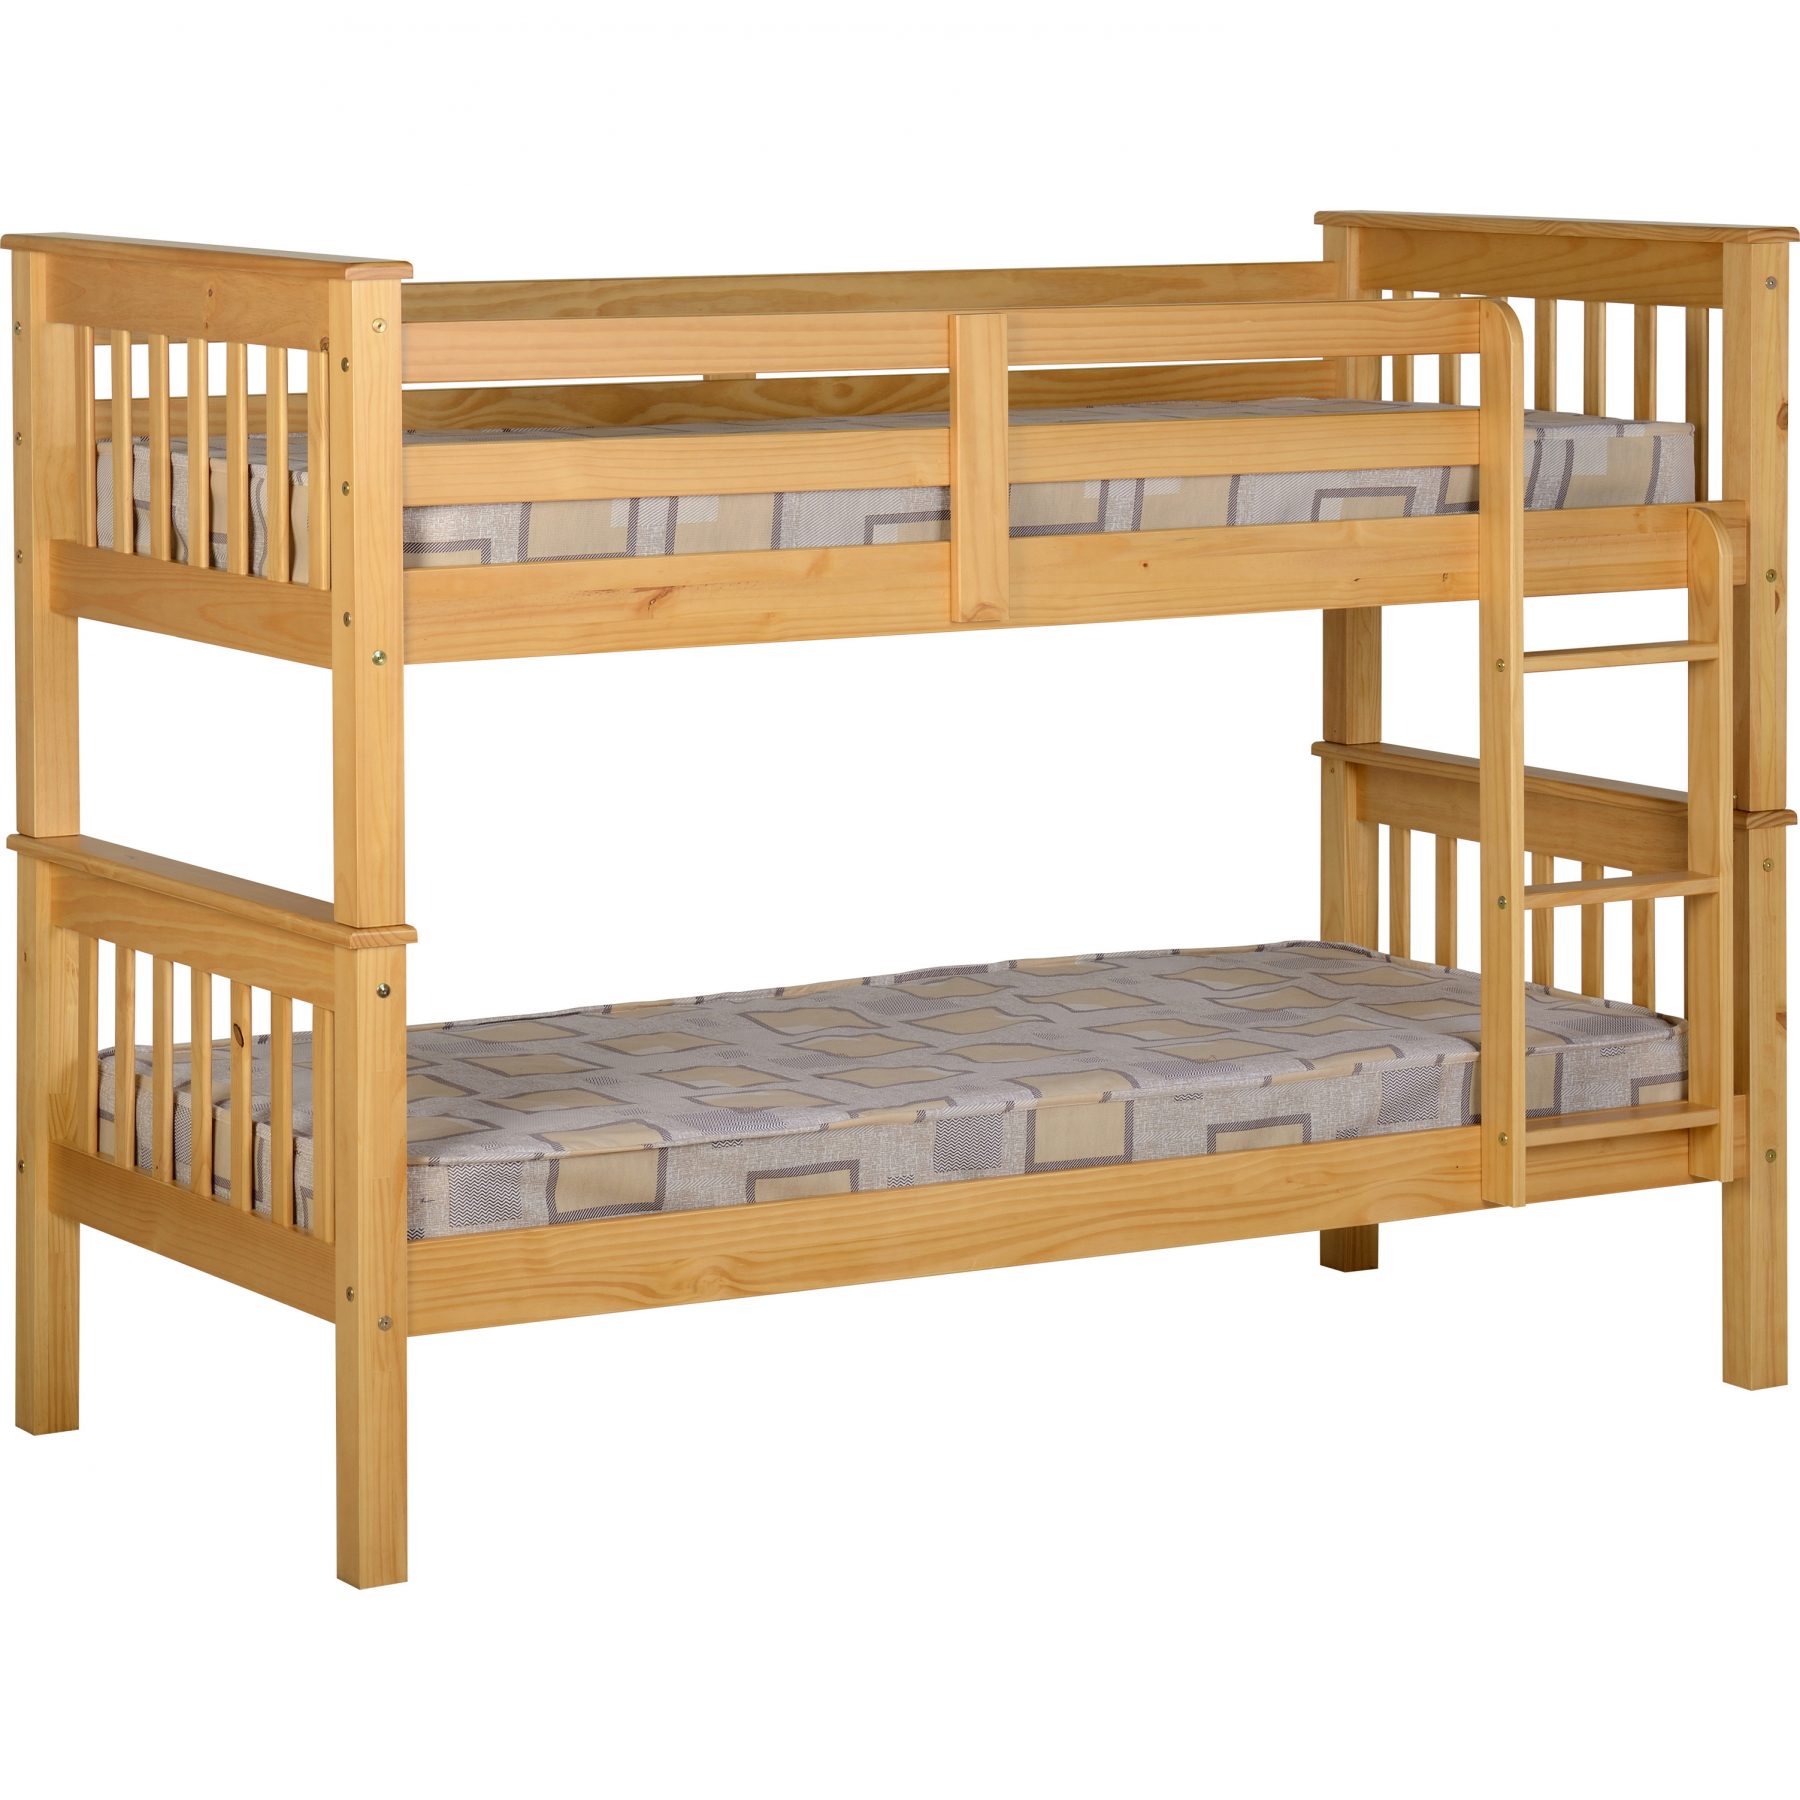 bunk beds that split into single beds